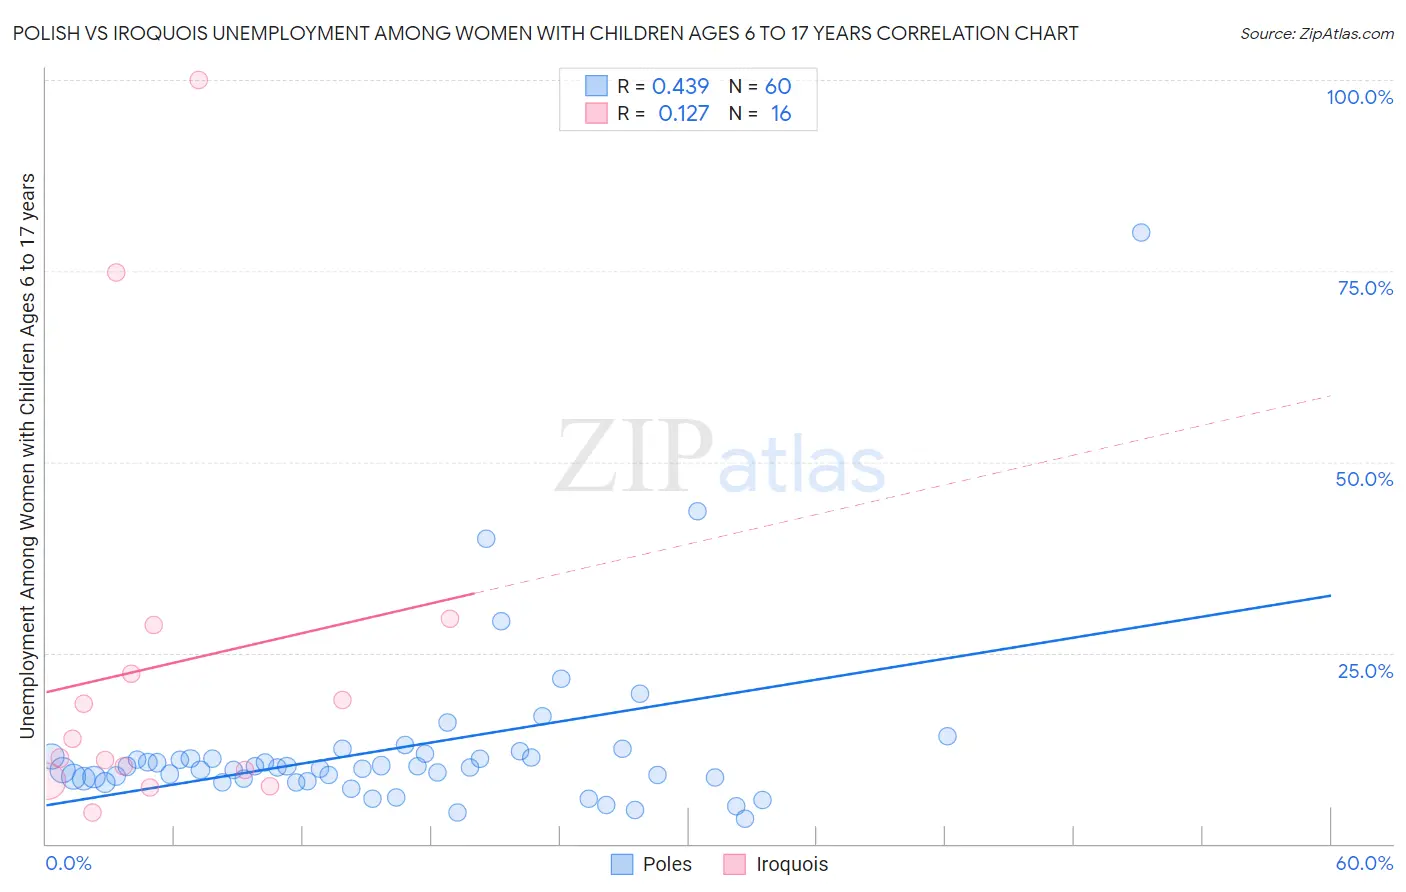 Polish vs Iroquois Unemployment Among Women with Children Ages 6 to 17 years